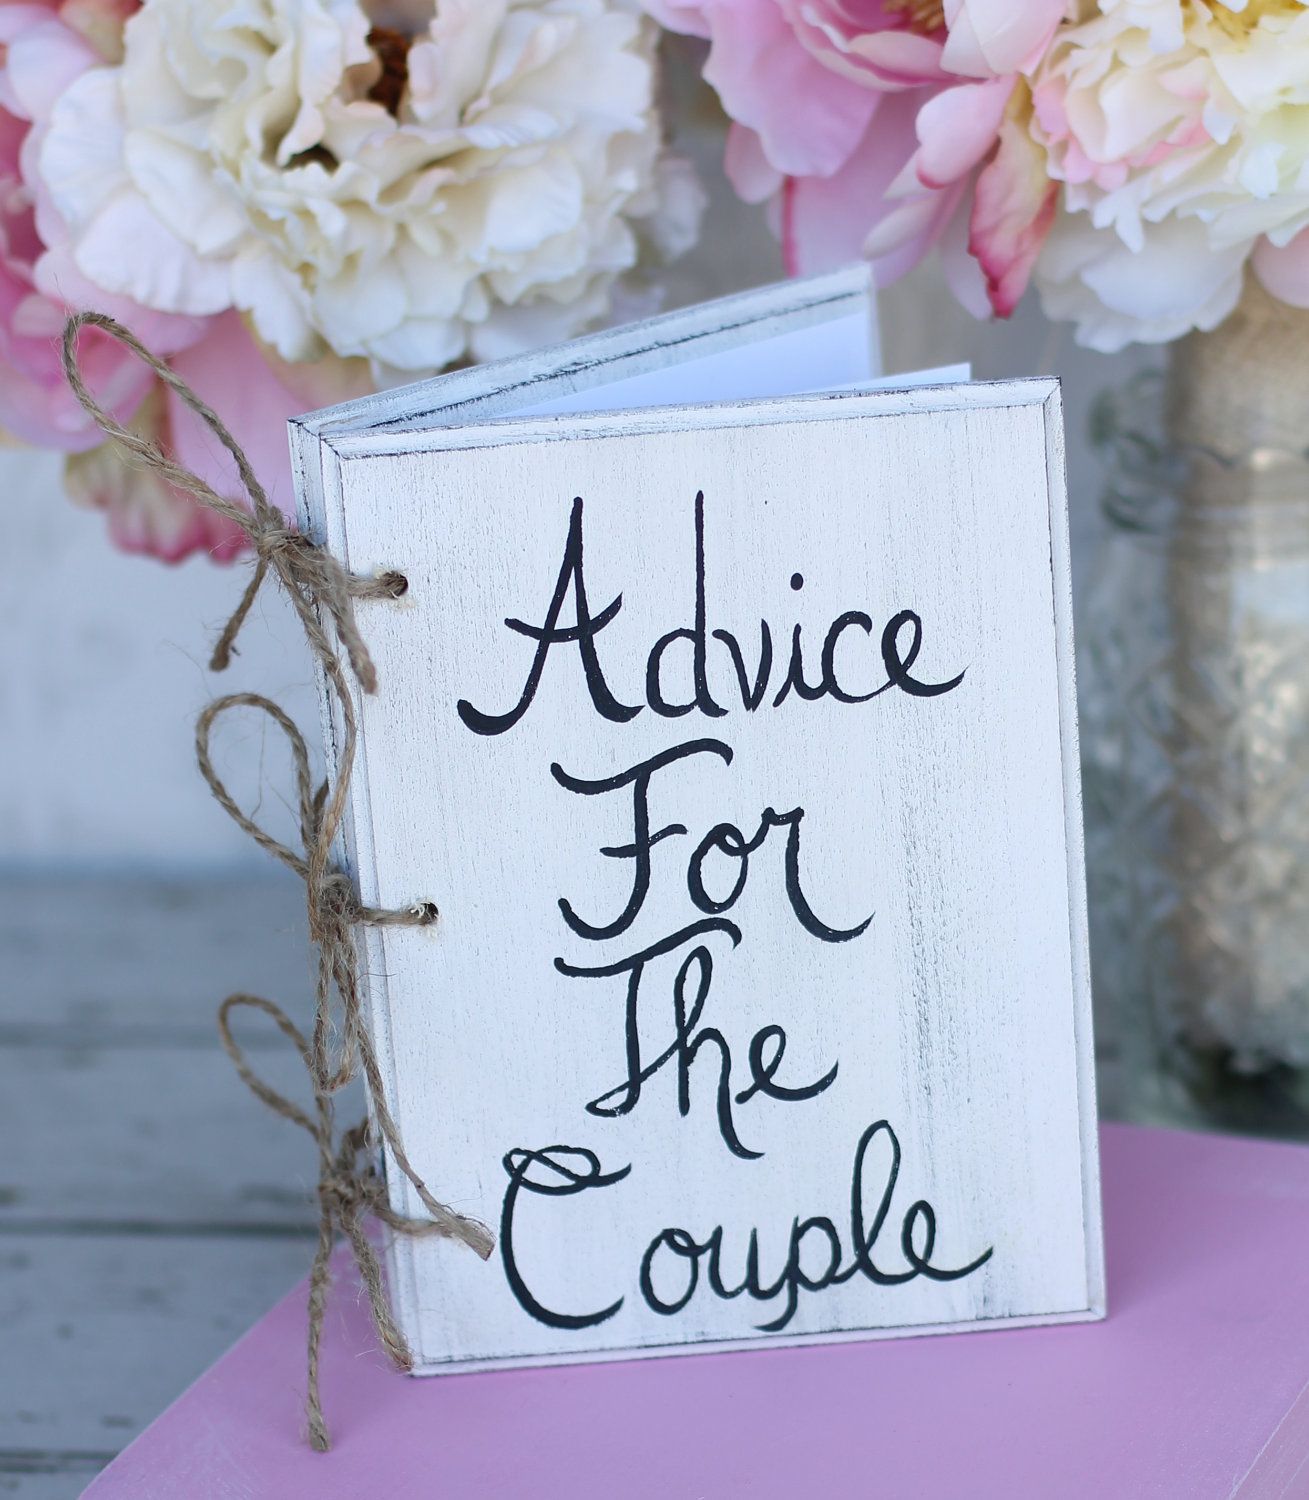 Bridal Shower Guest Book Shabby Chic Wedding Decor Advice For The Couple. $34.99